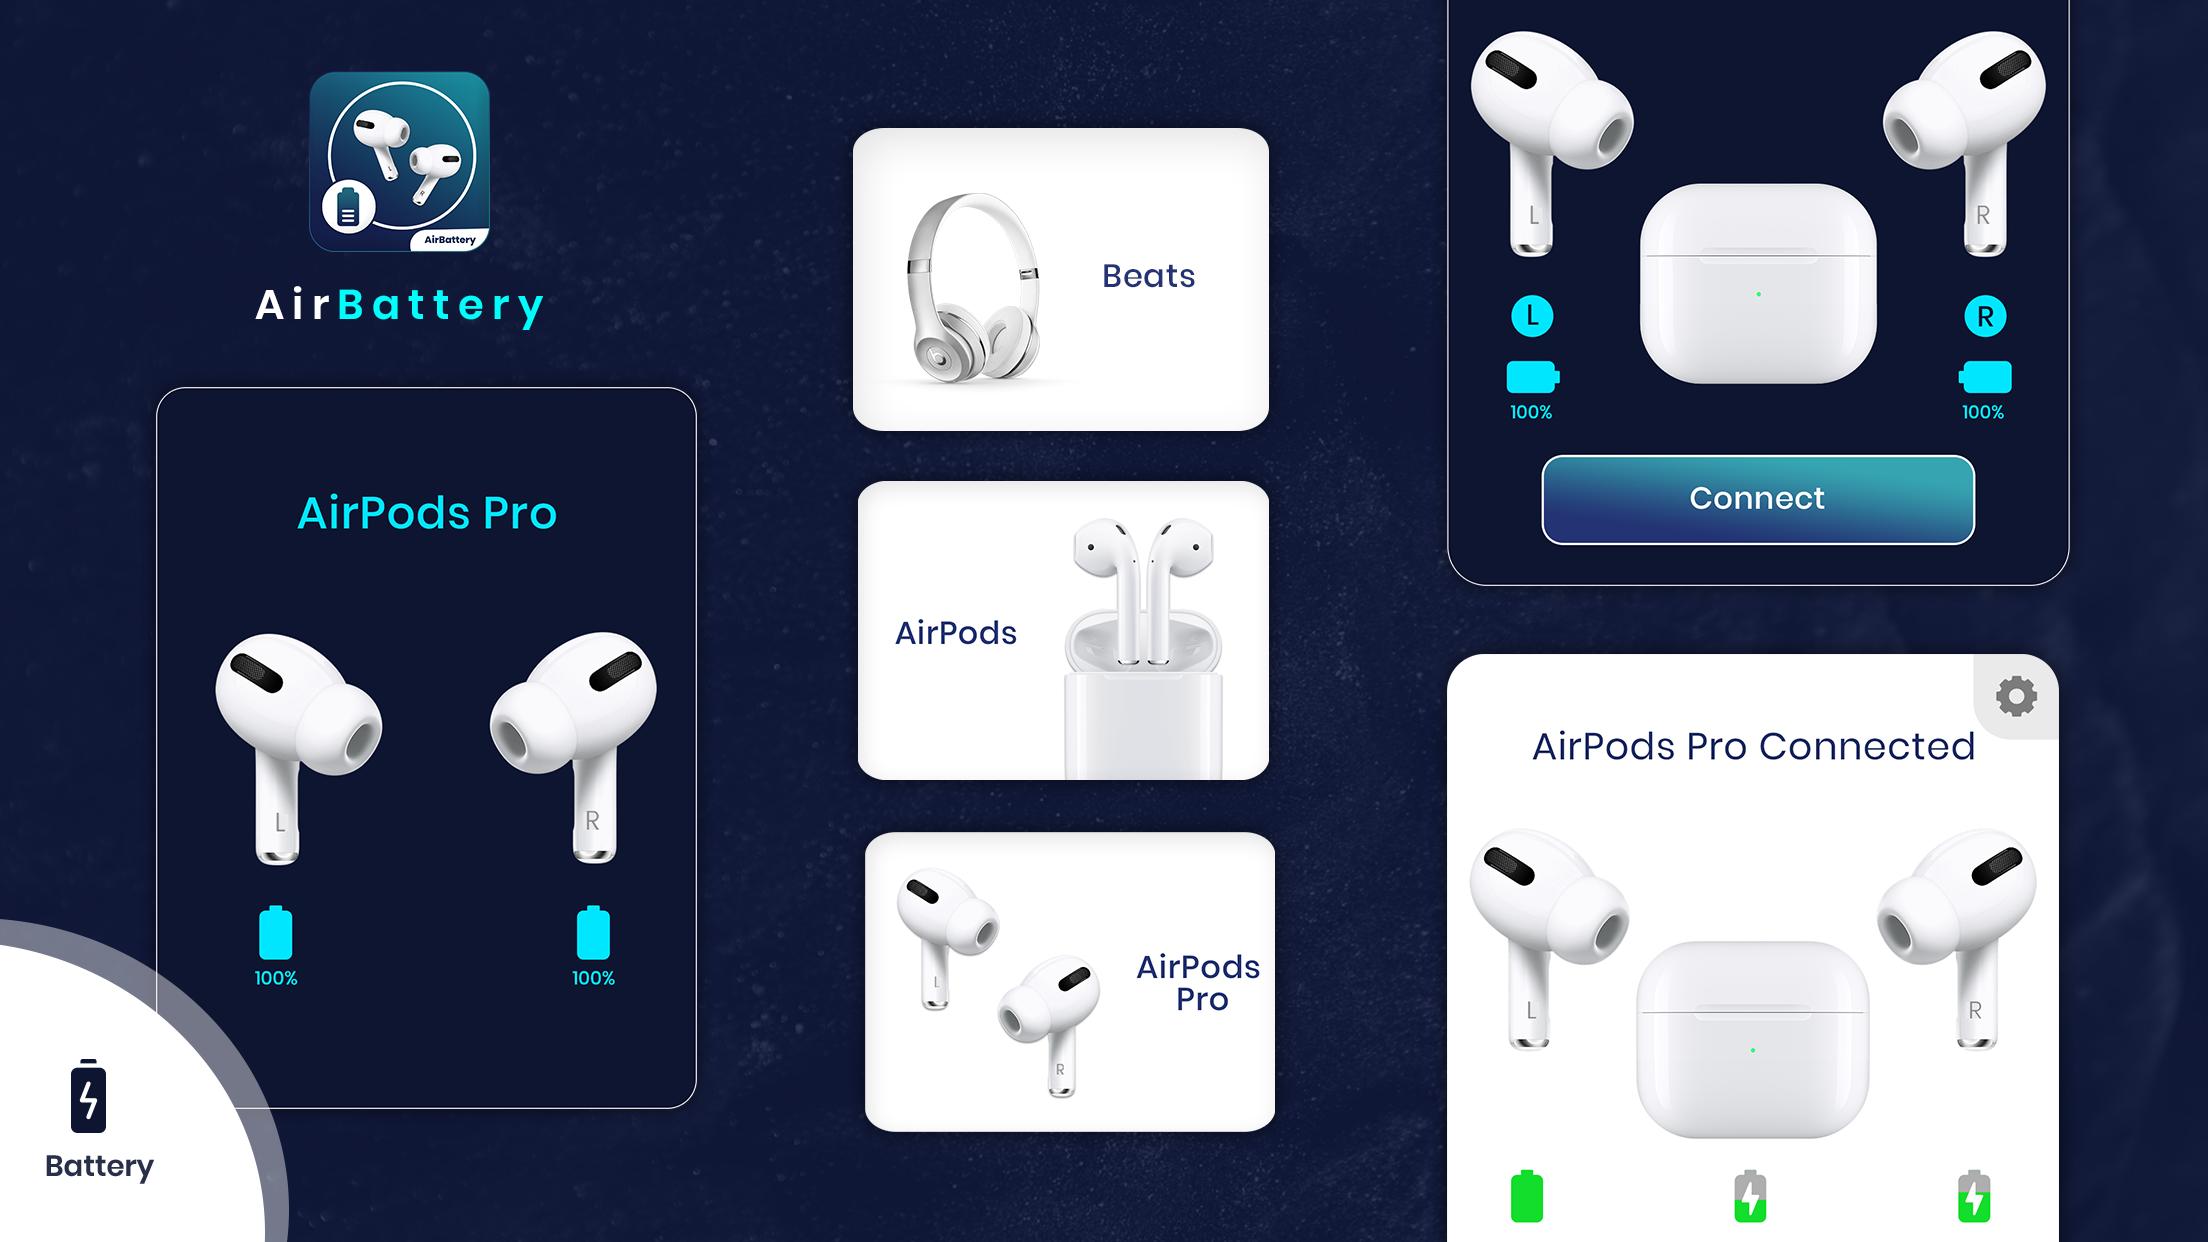 Pods battery pro. AIRPODS 1 схема. Pods Battery. Air Battery. Air Battery Pro.